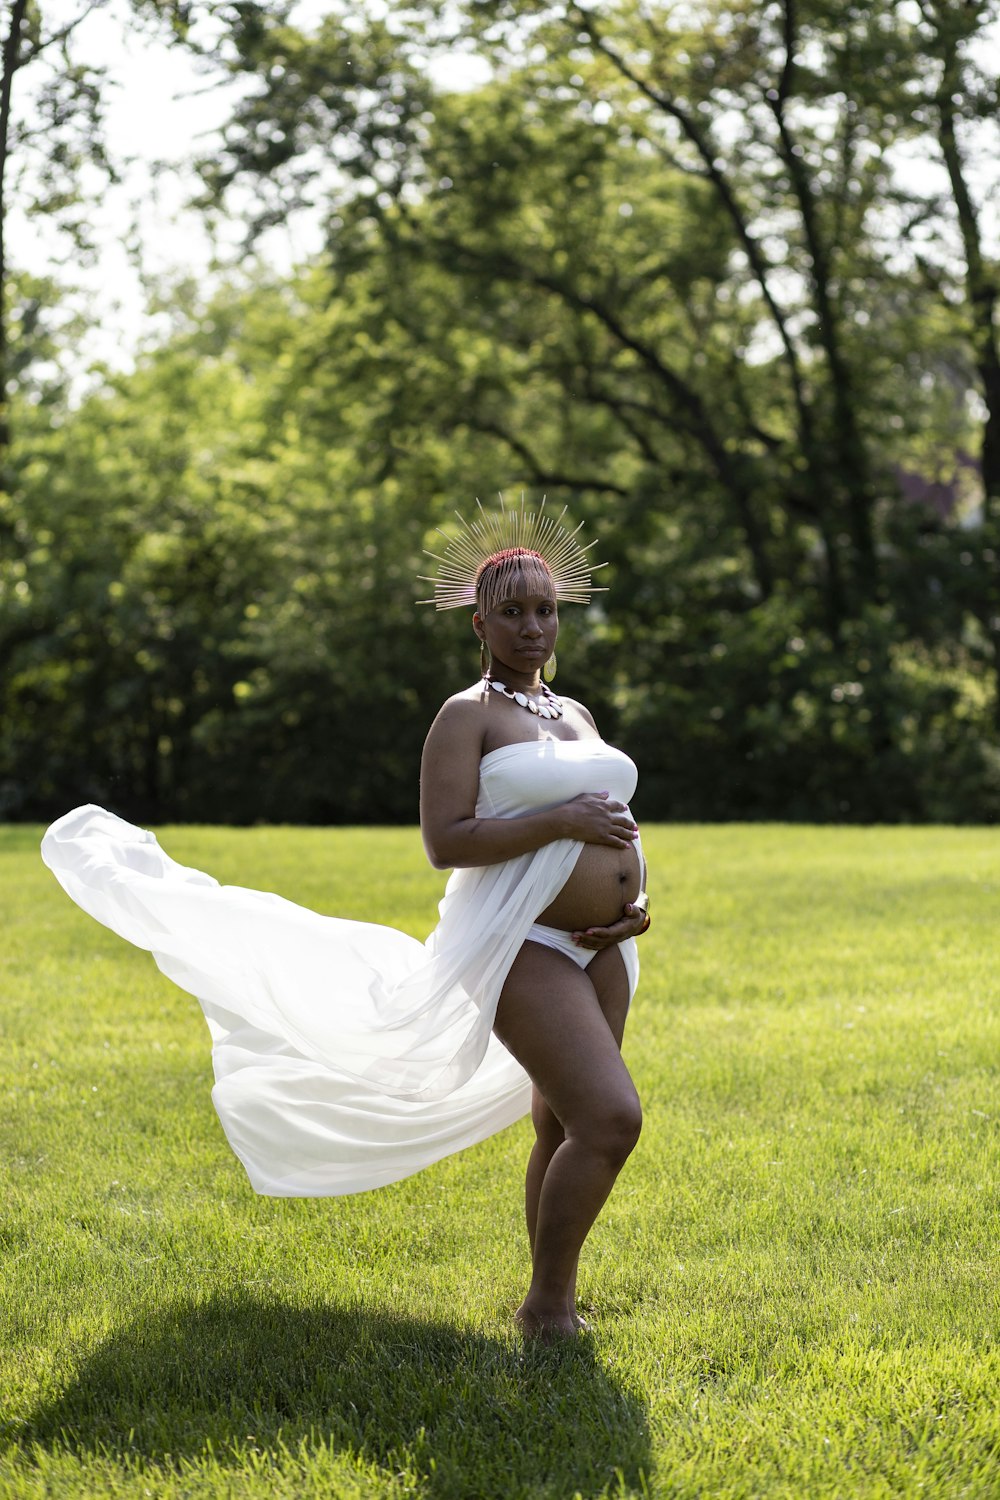 Maternity Shoot Pictures | Download Free Images on Unsplash